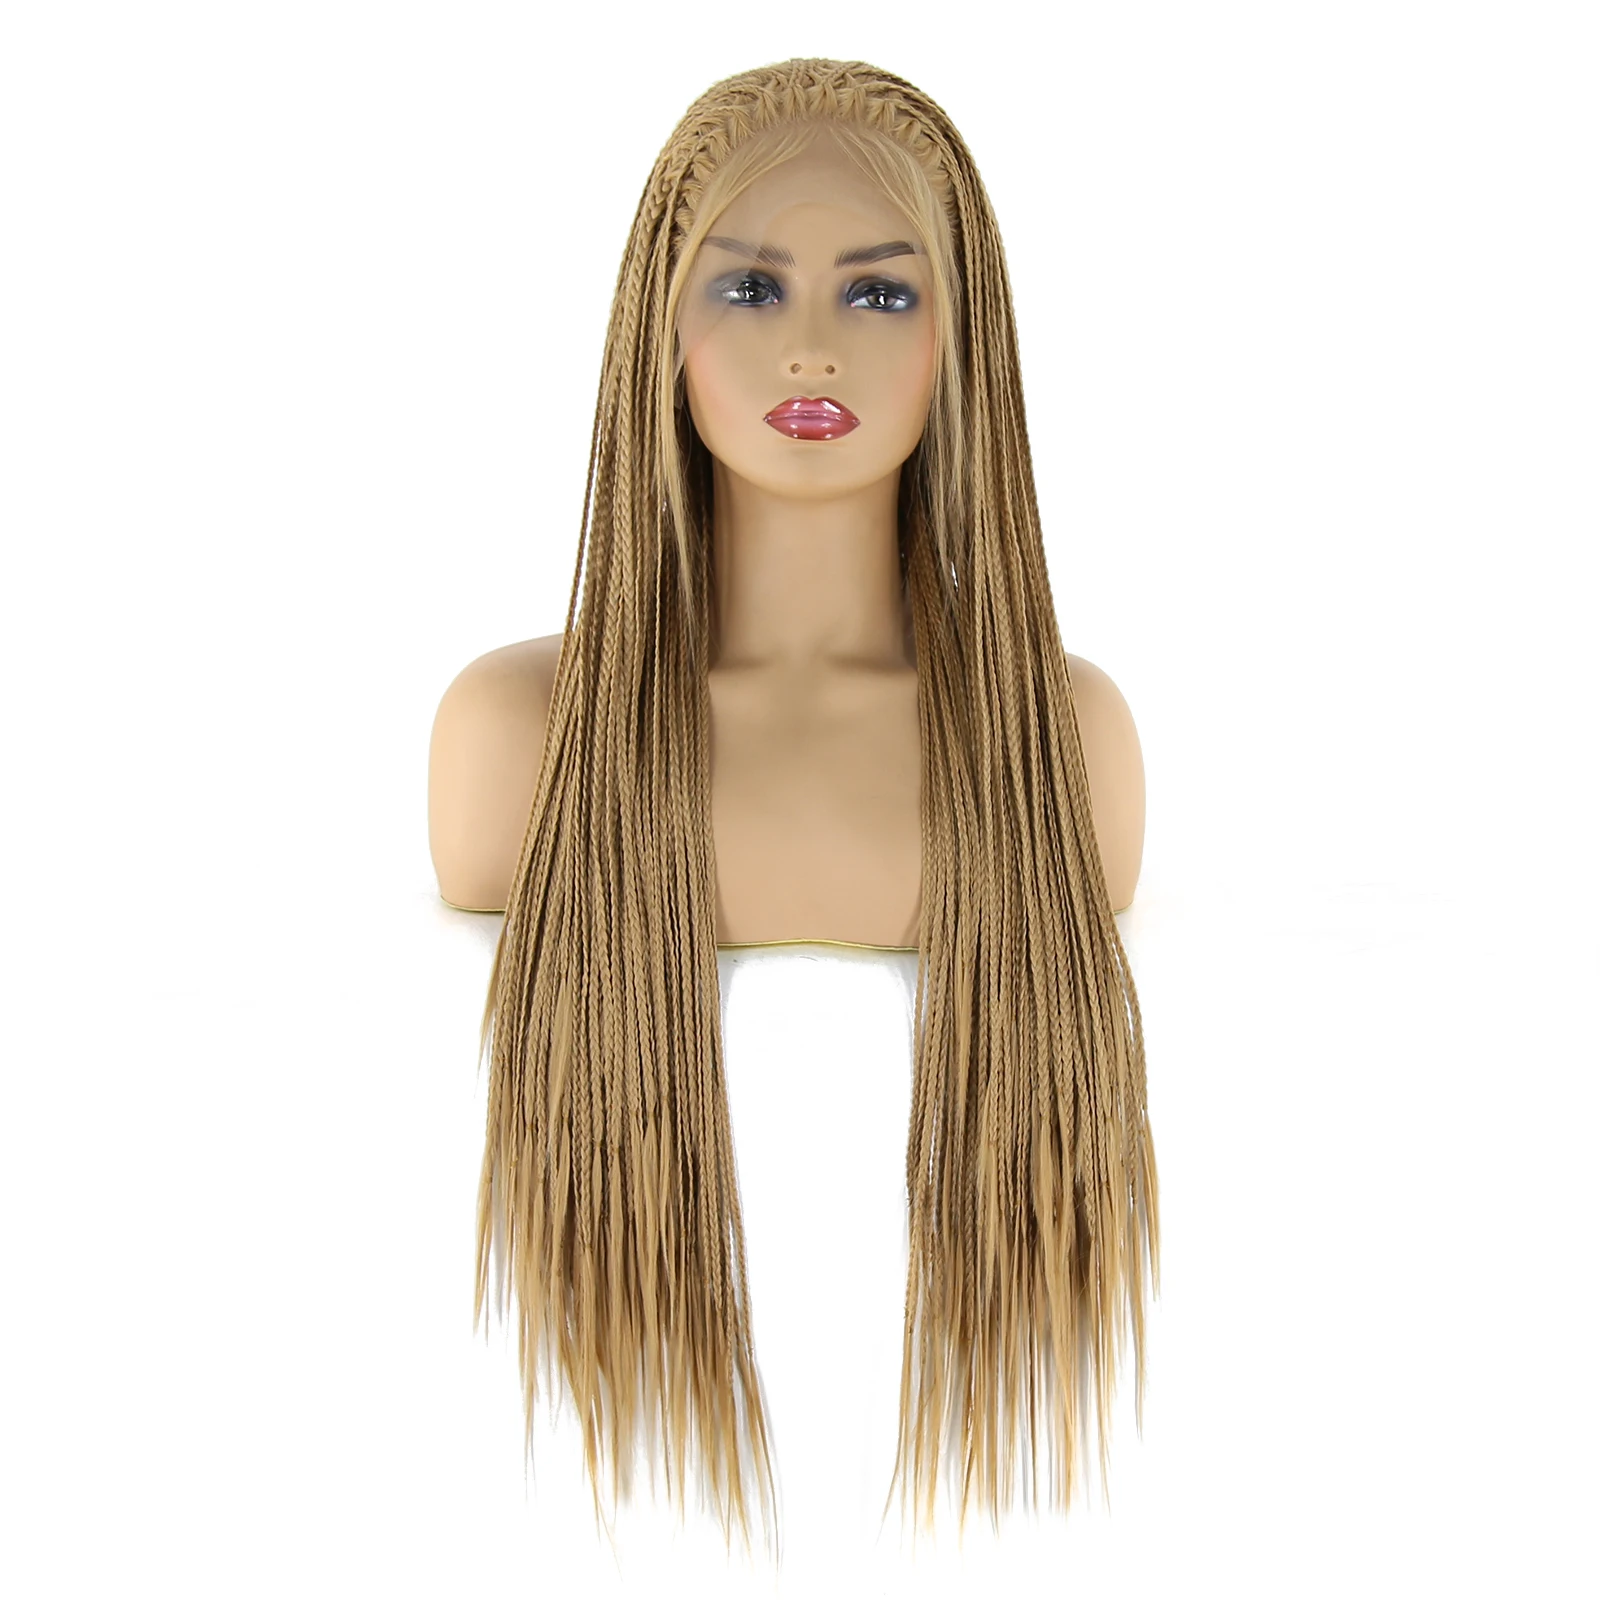 BTWTRY Light Brown #27 Color Micro Braided Synthetic Lace Front Wigs Box Braids Wig for Black Women Heat Resistant Fiber Hair